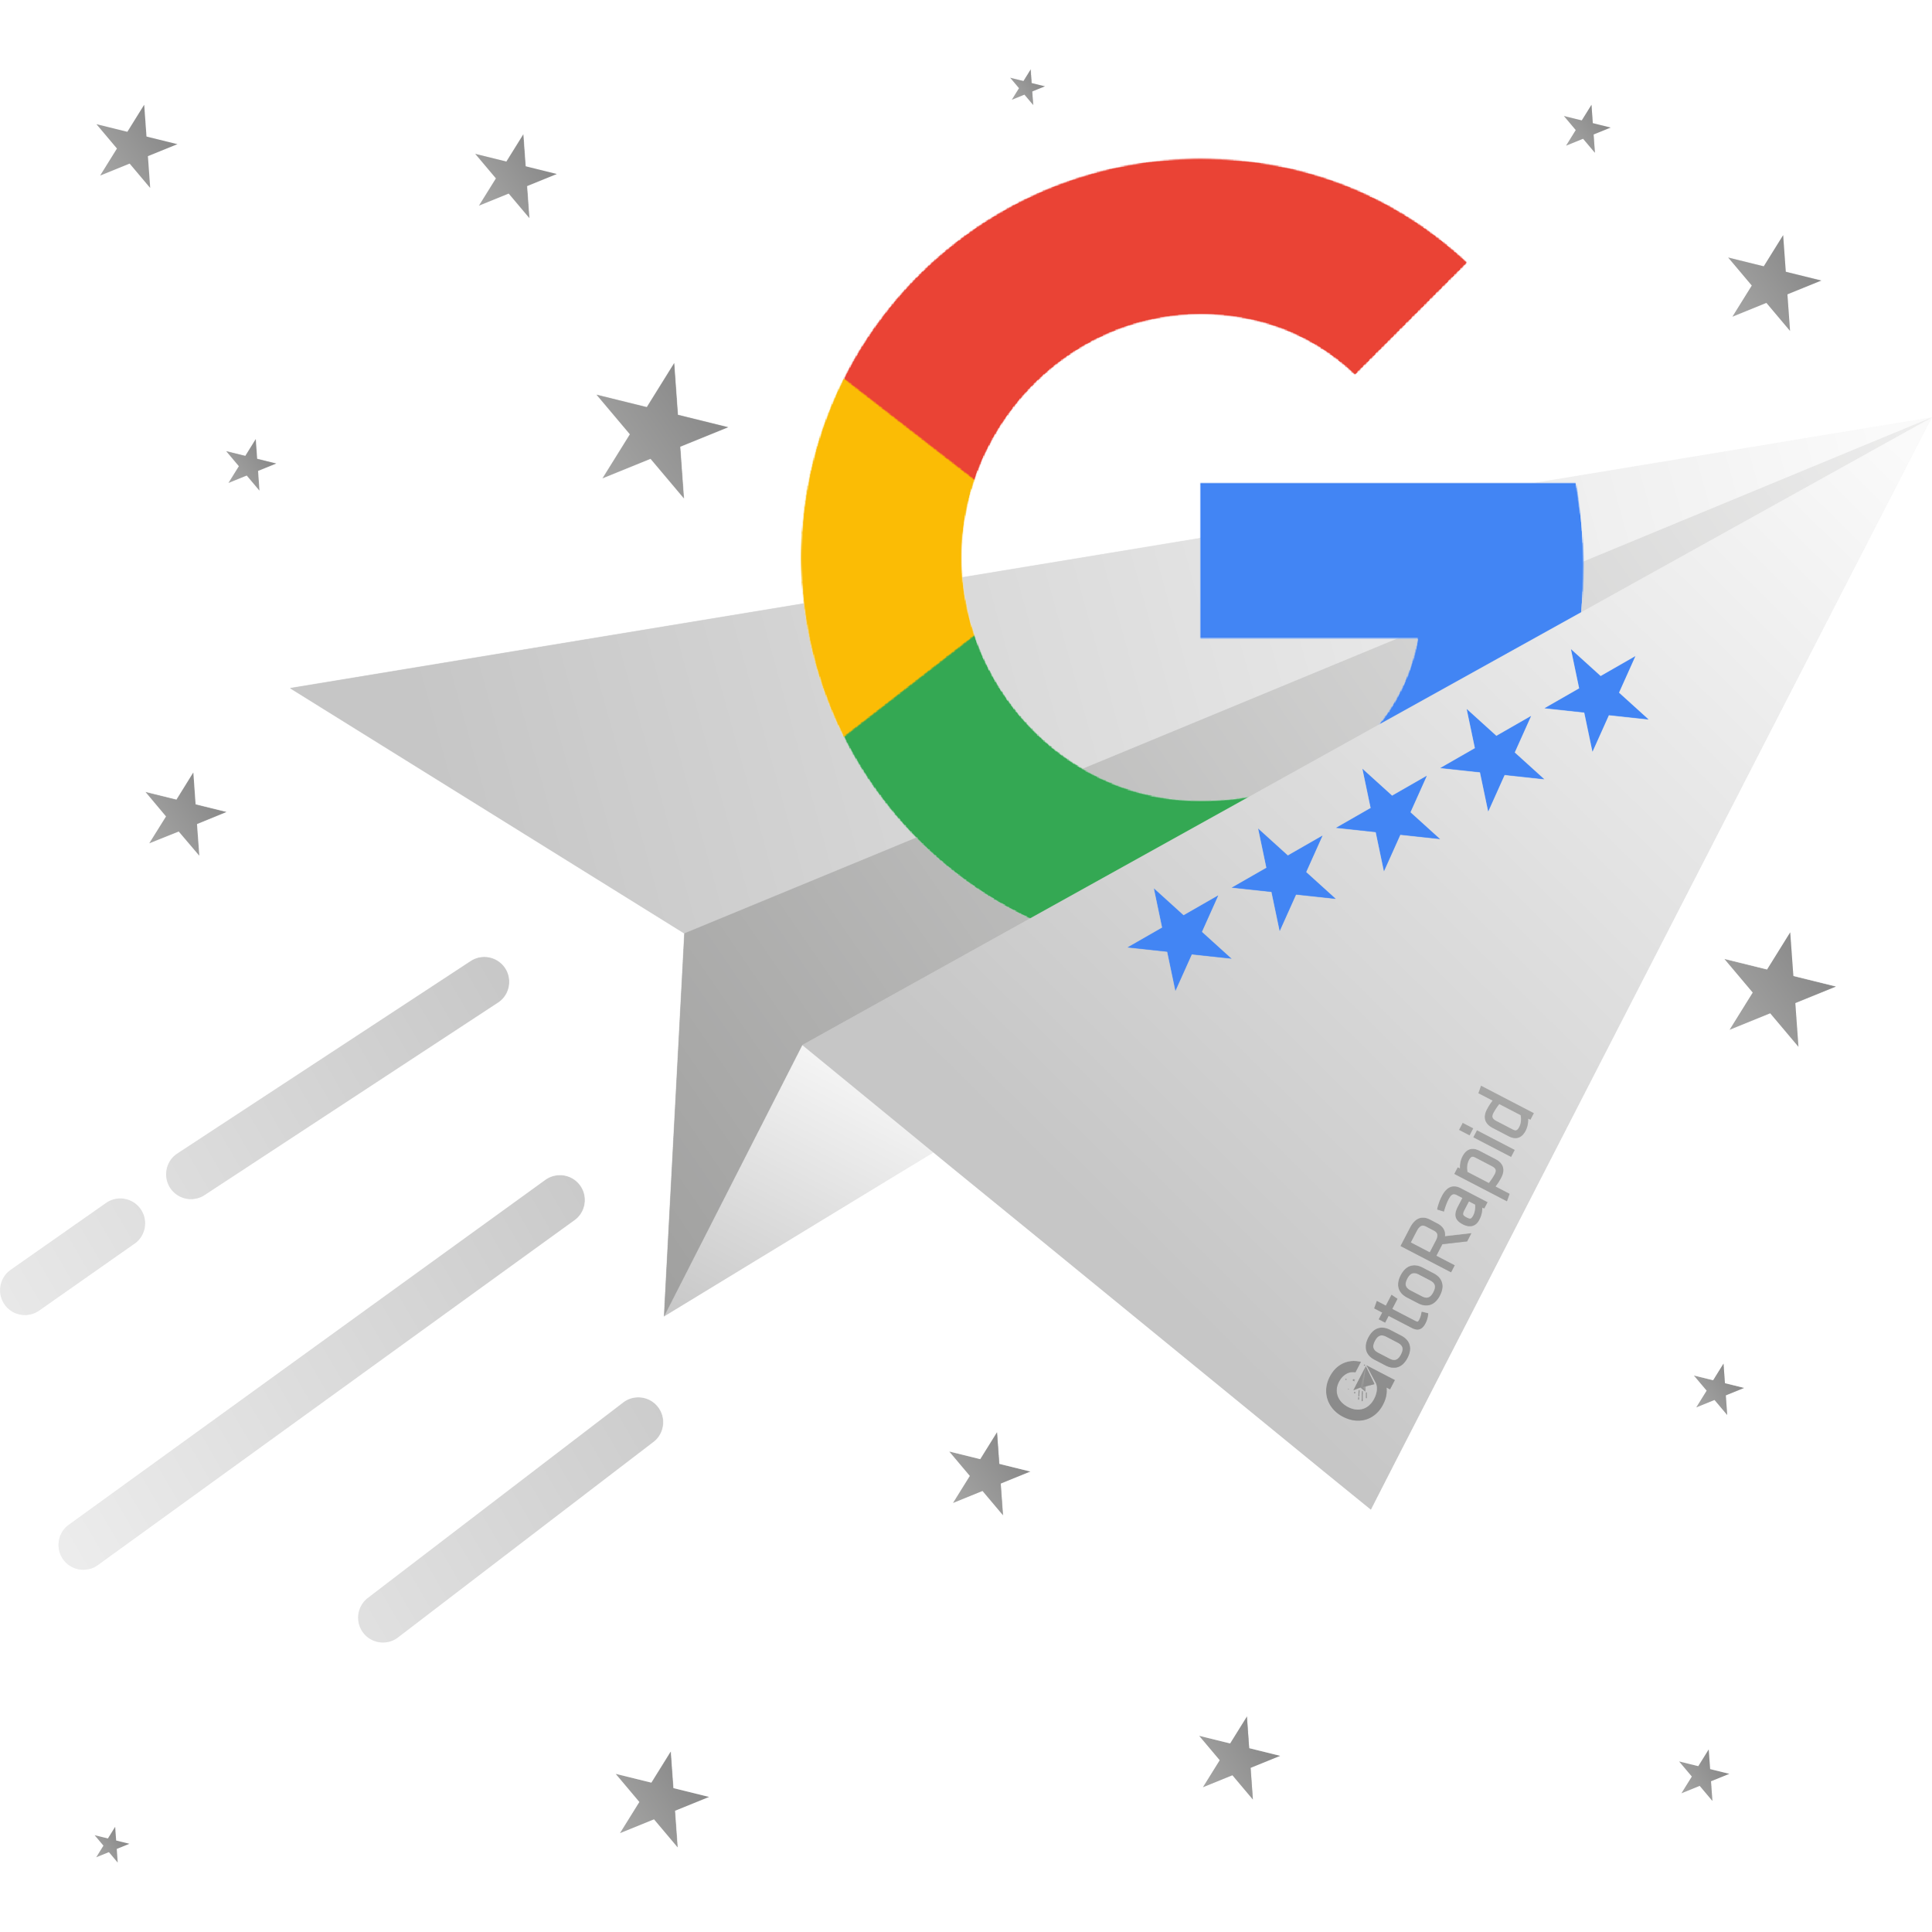 Buy Google Reviews - 5-Stars and Positive Reviews in Cheap...